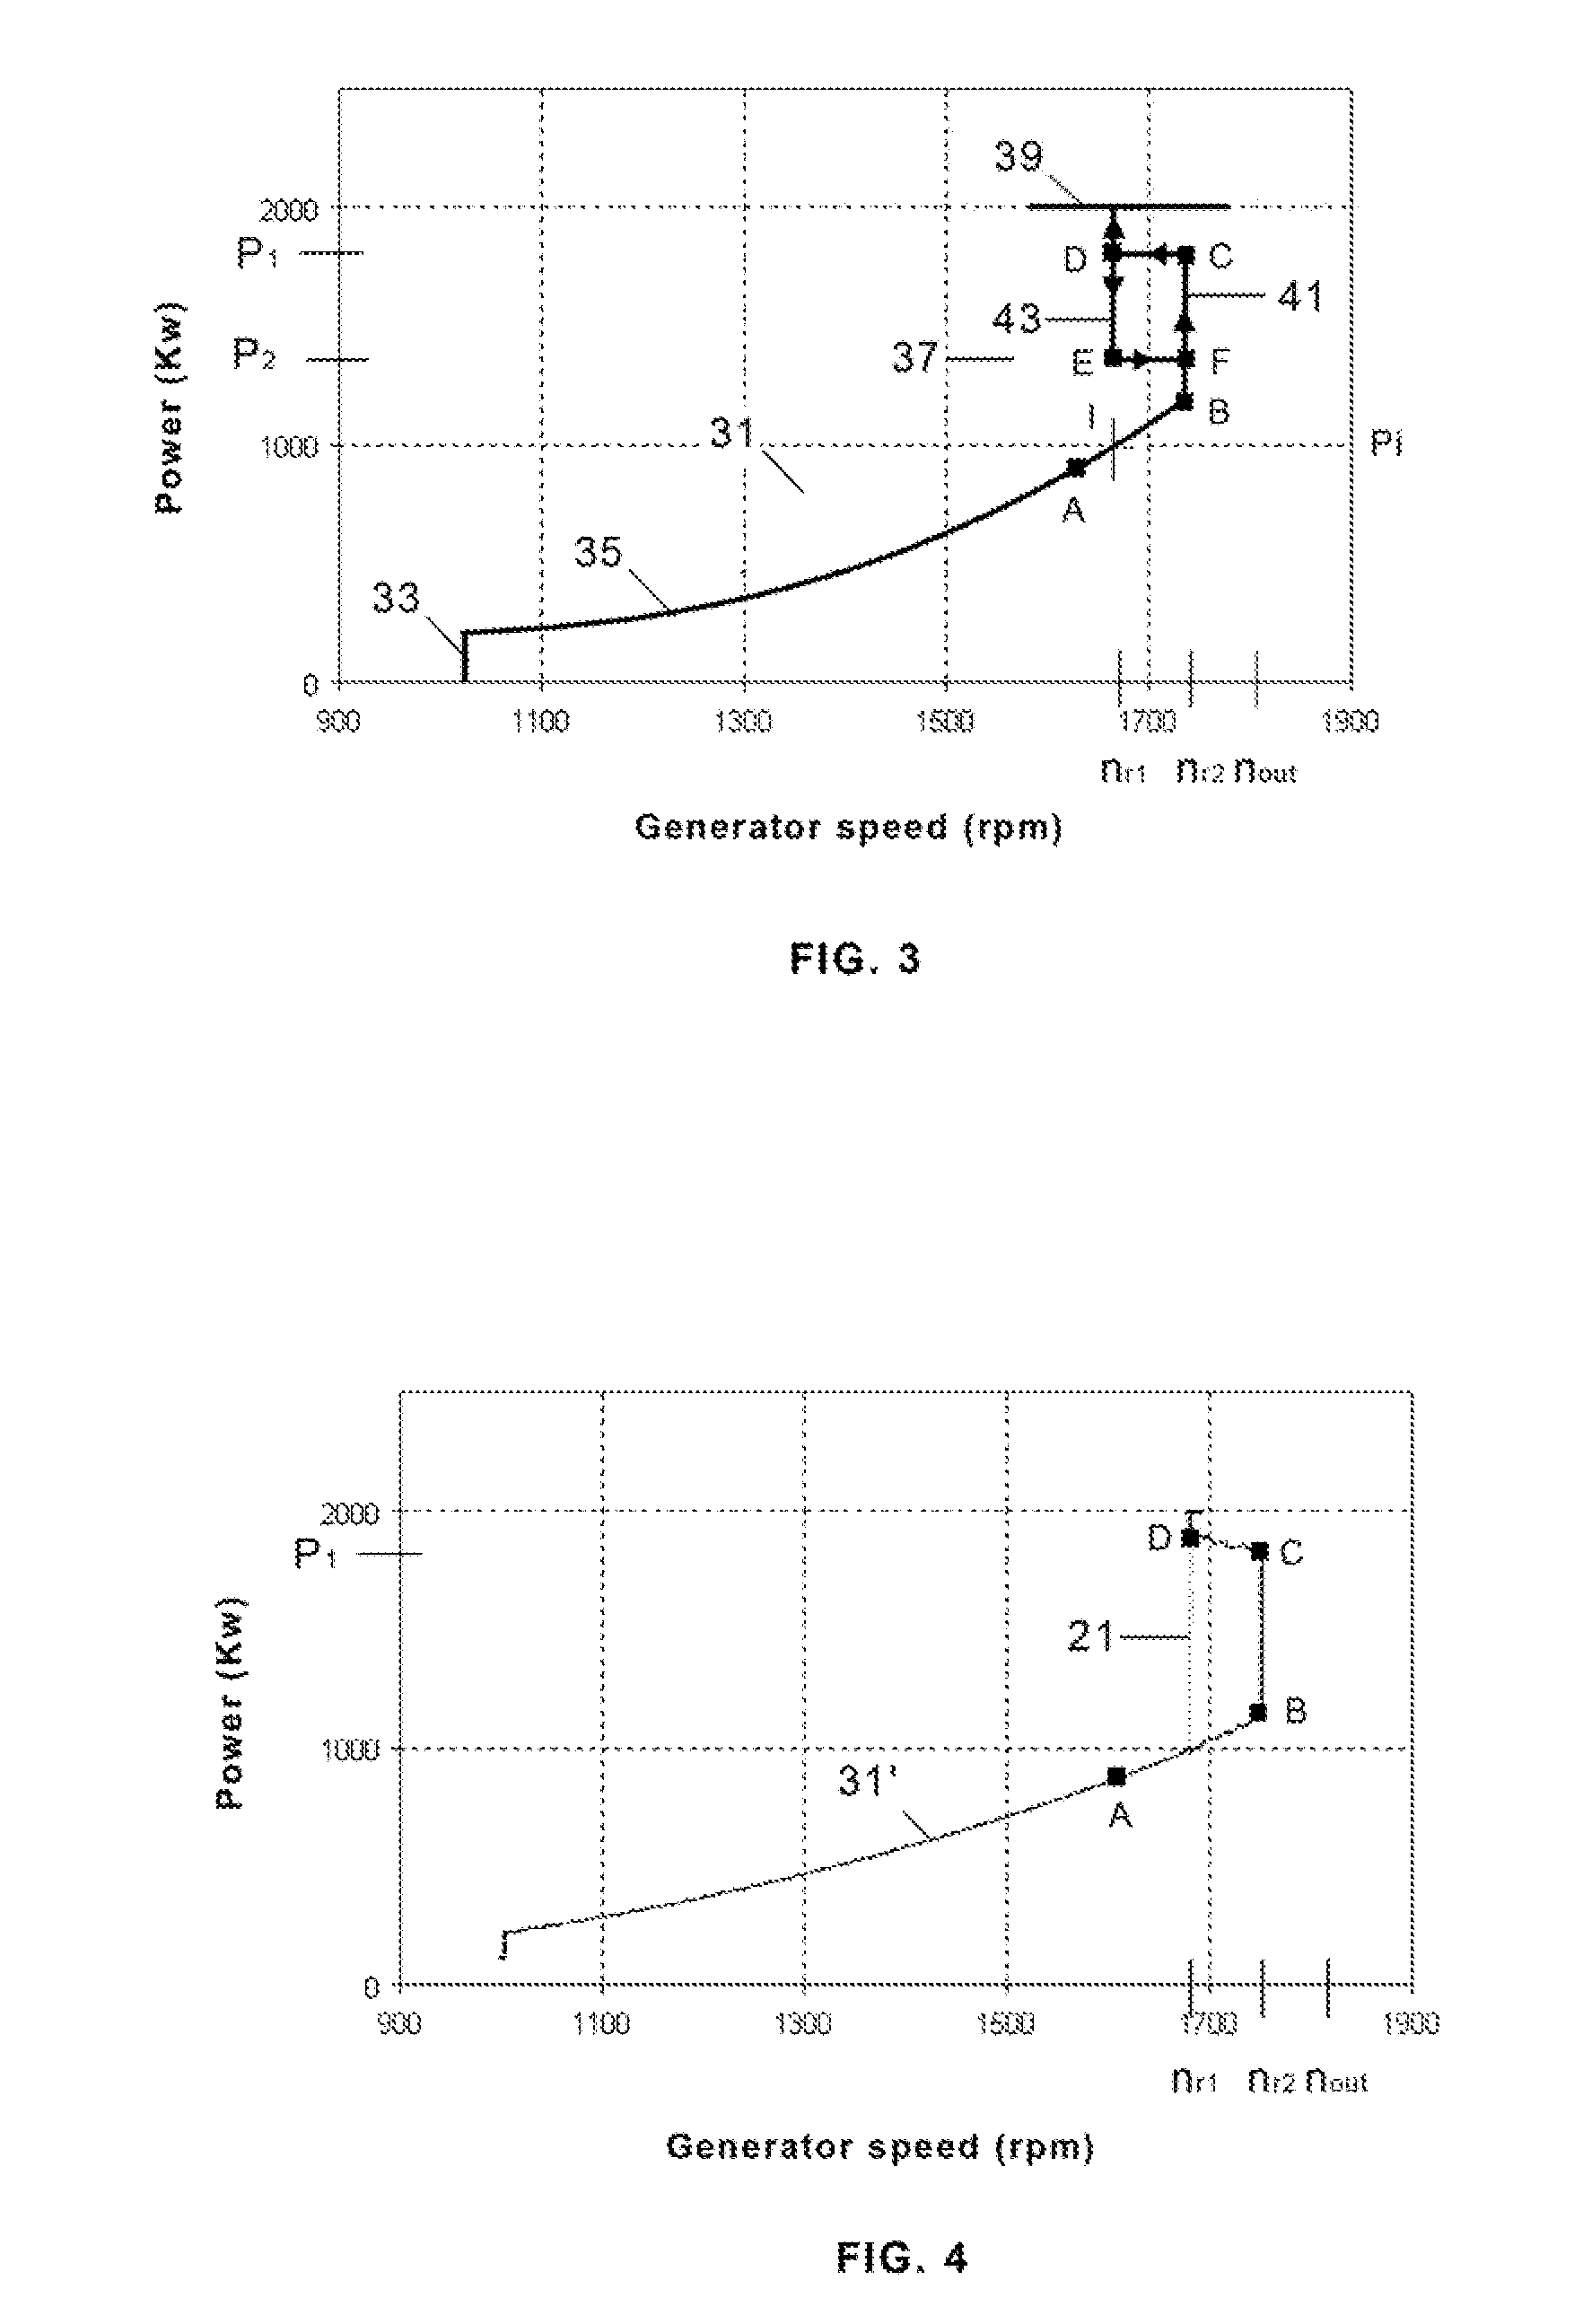 Wind turbine control methods for improving the production of energy